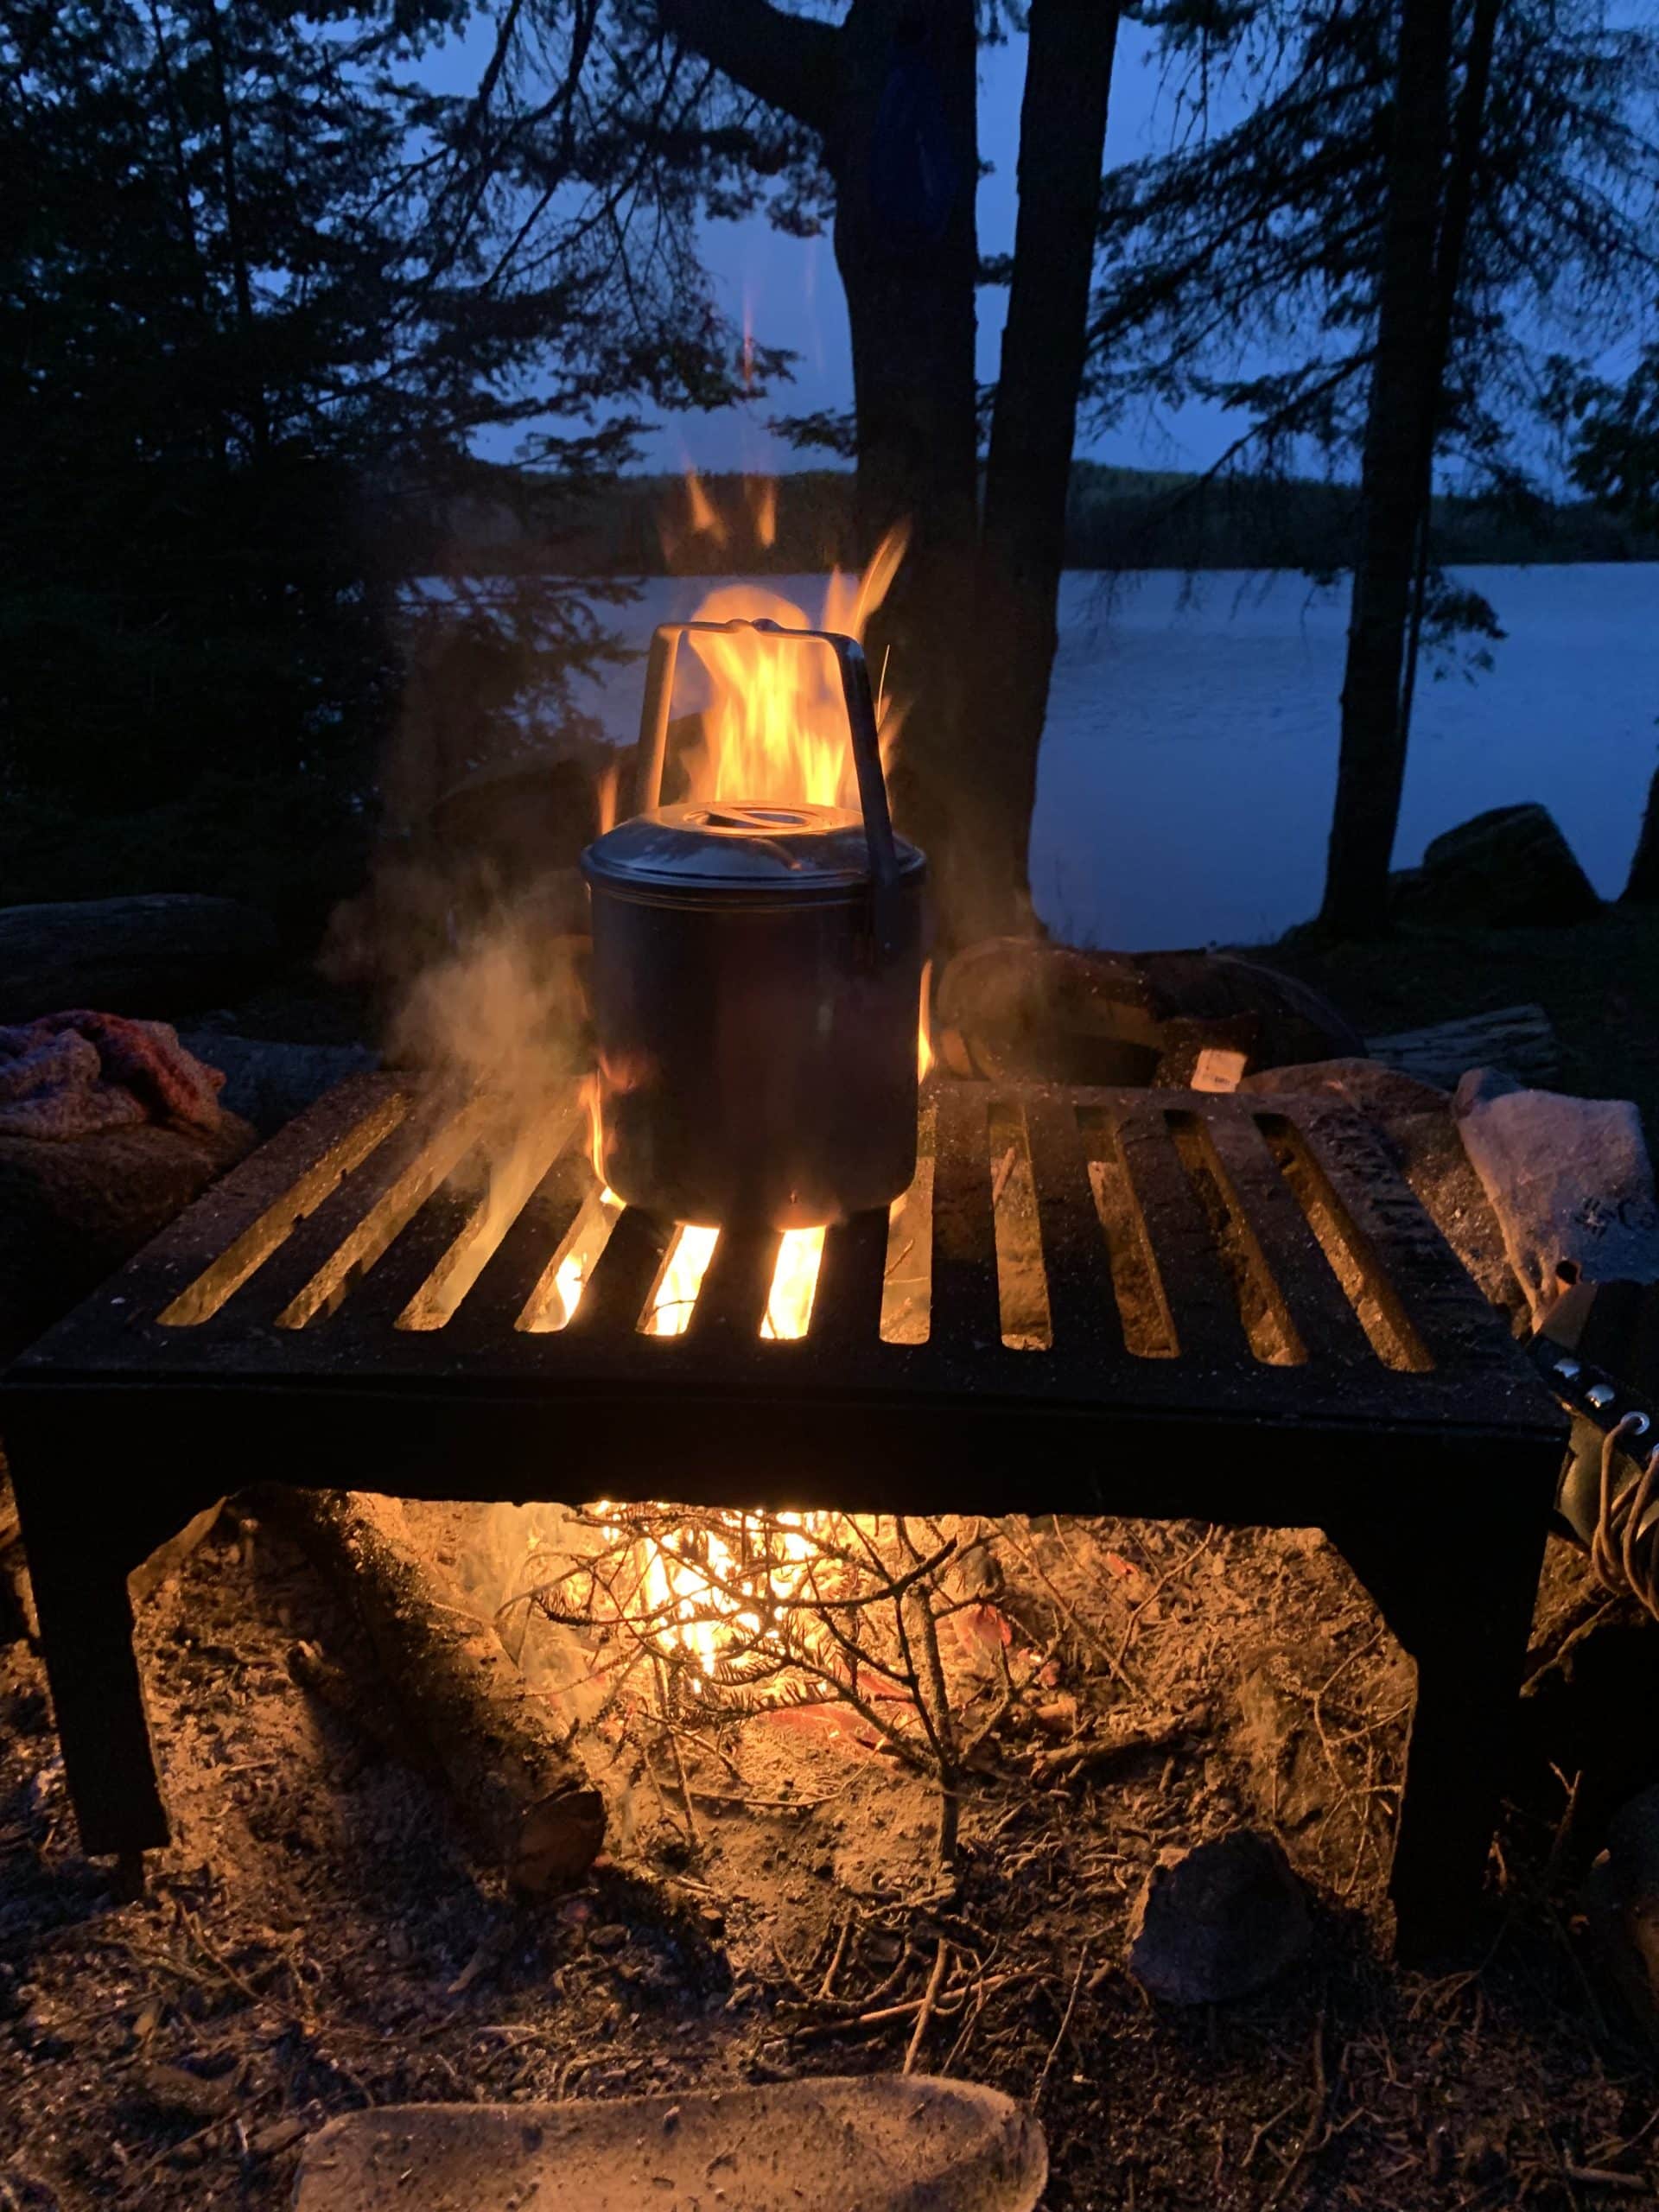 A Life-Changing Trip to the BWCA